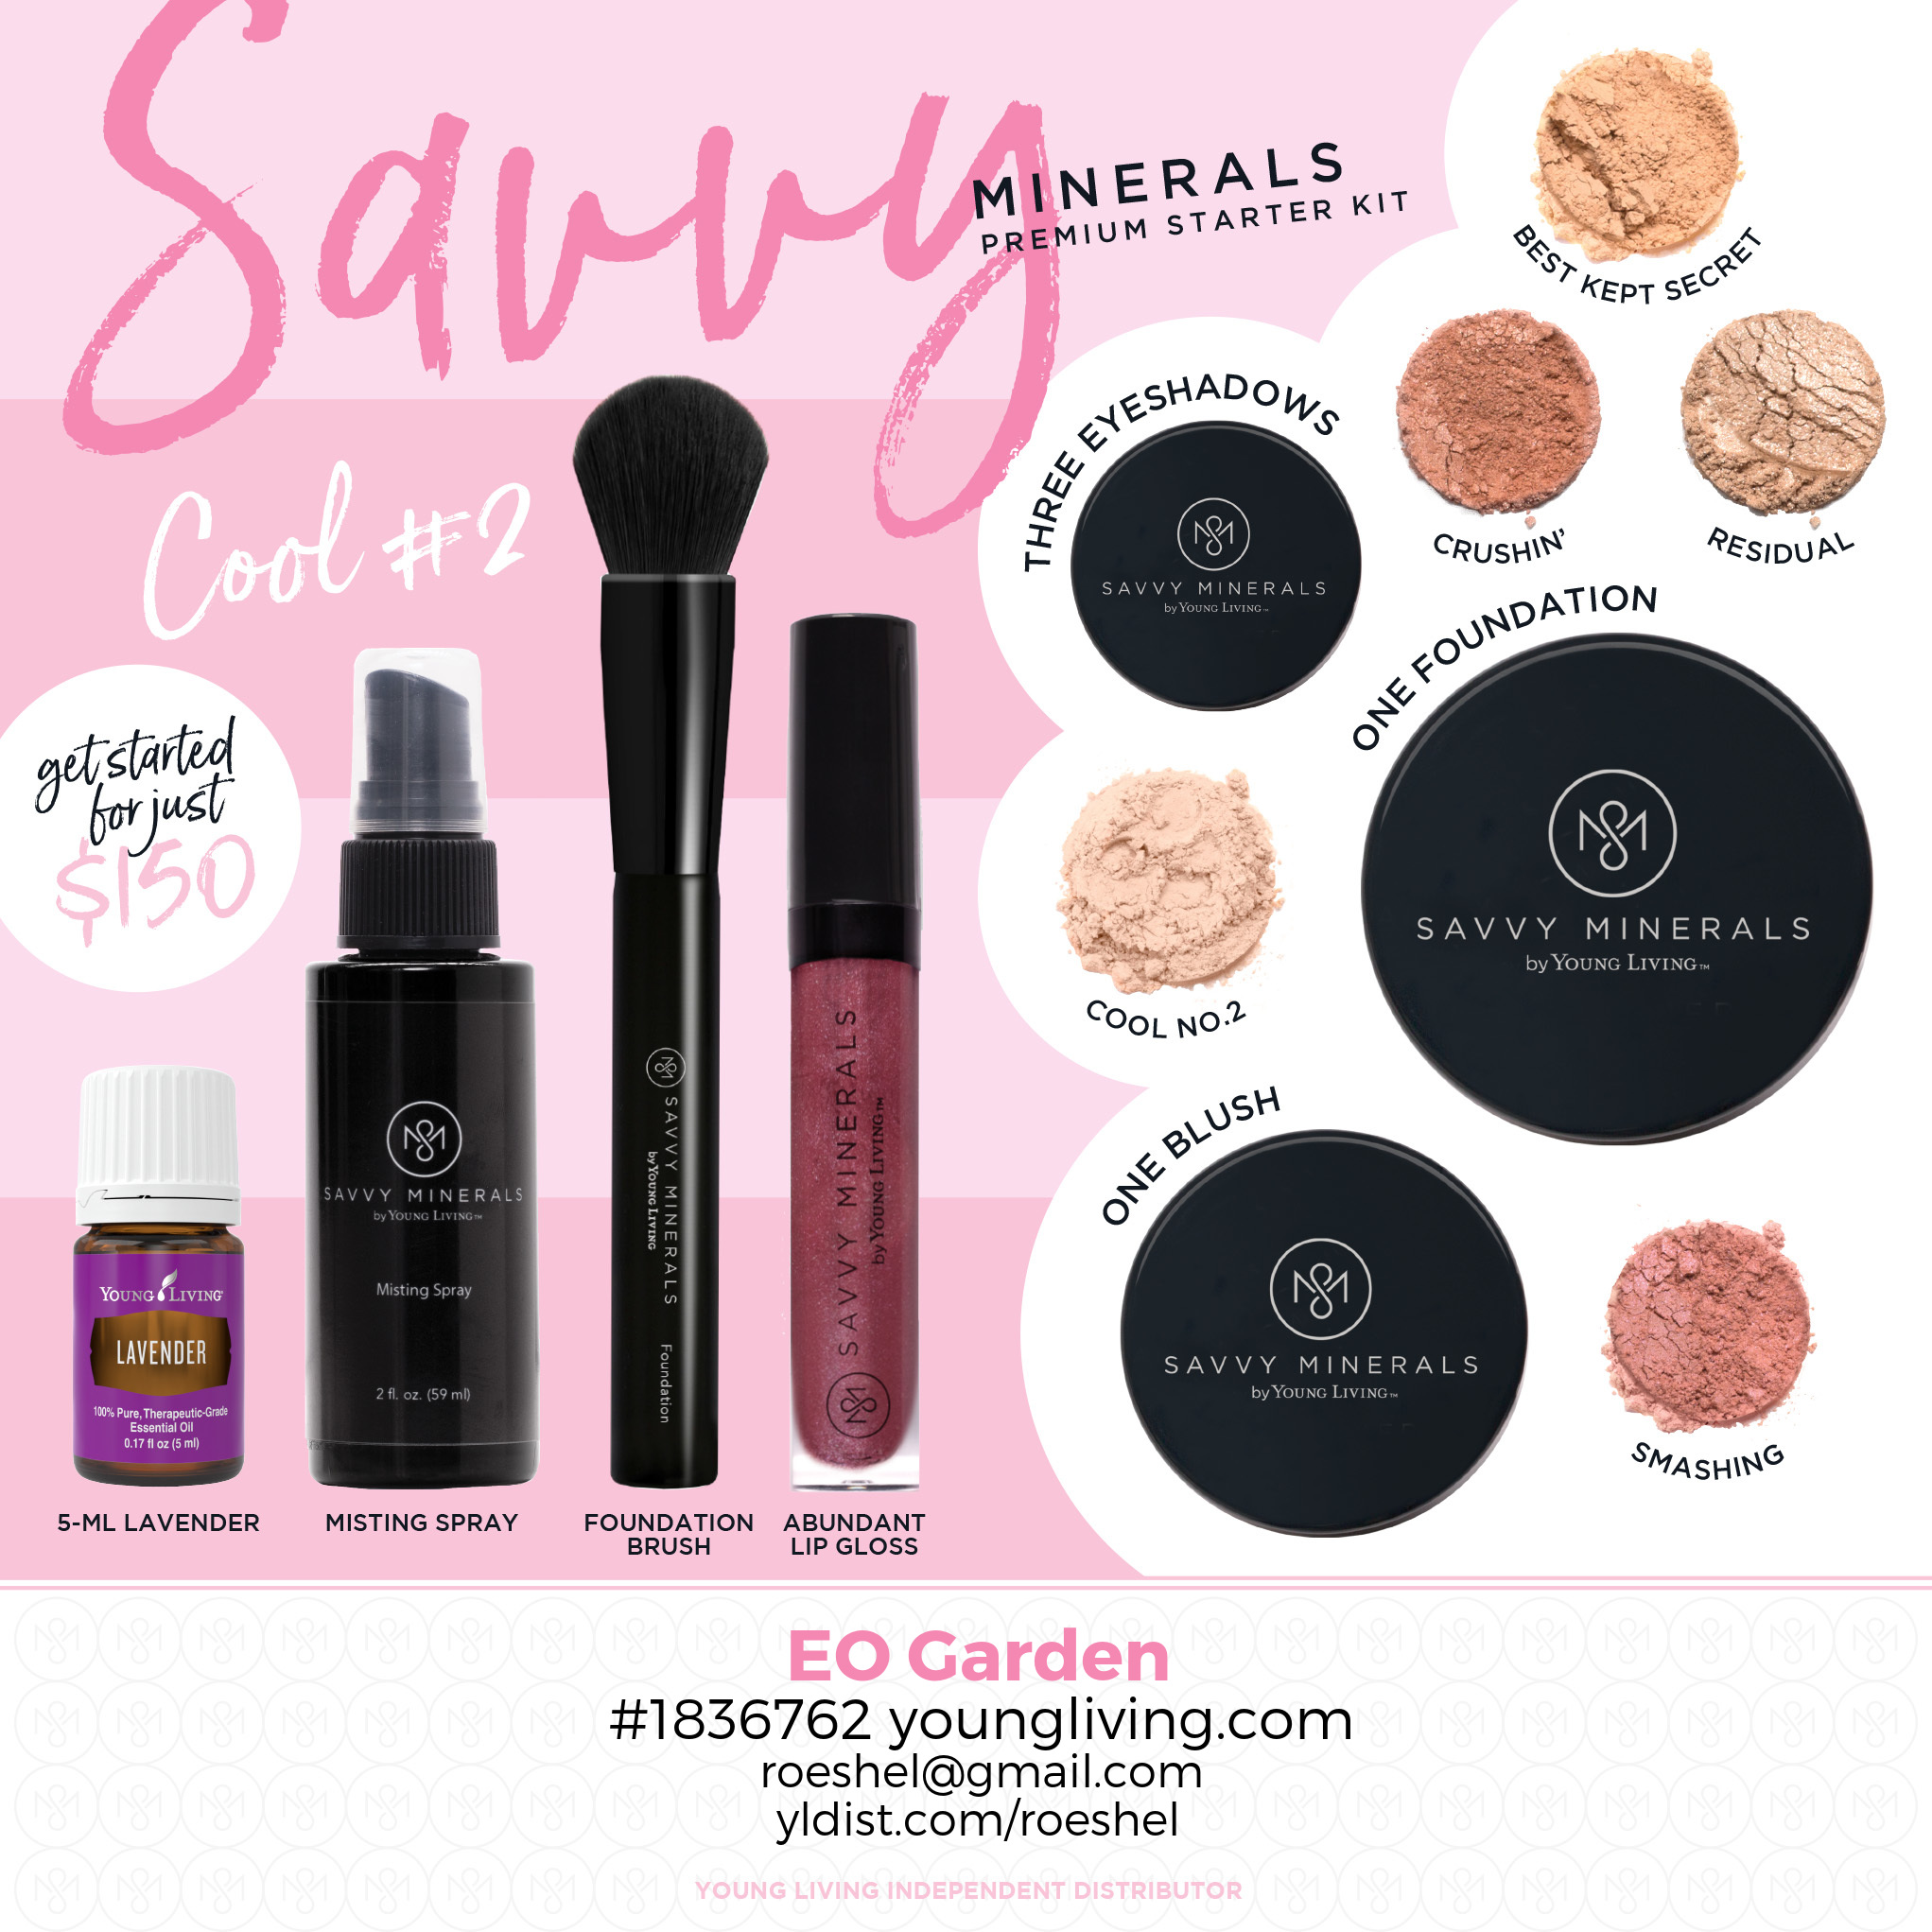 Cool 2 Savvy Minerals chemical free makeup